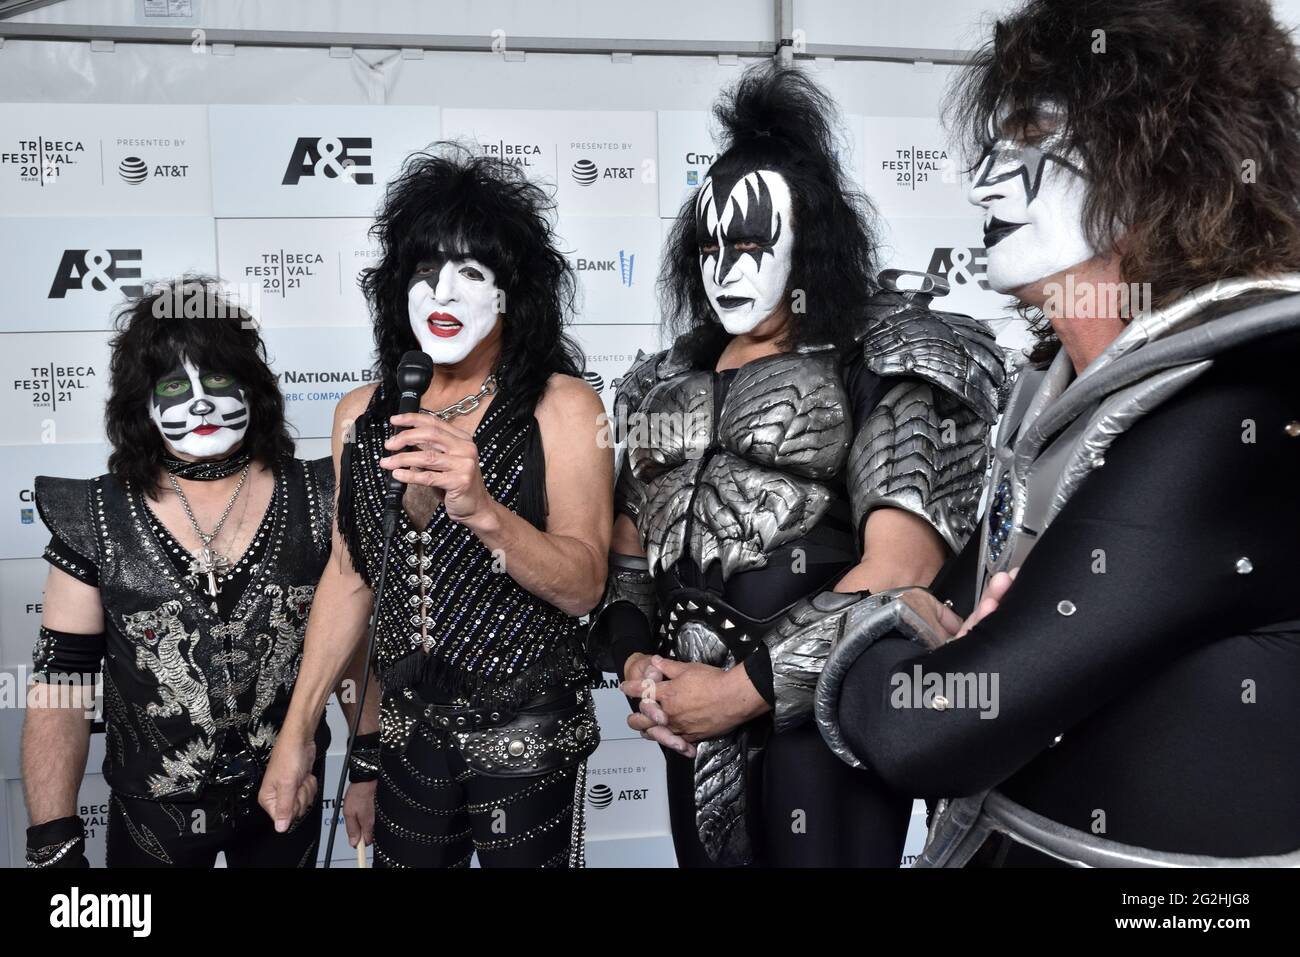 New York, USA. 11th June, 2021. L-R: KISS musicians Eric Singer, Paul Stanley, Gene Simmons and Tommy Thayer attend the premiere of Biography:KISStory at the Tribeca Festival 2021 at The Battery in New York, NY on June 11, 2021. (Photo by Stephen Smith/SIPA USA) Credit: Sipa USA/Alamy Live News Stock Photo